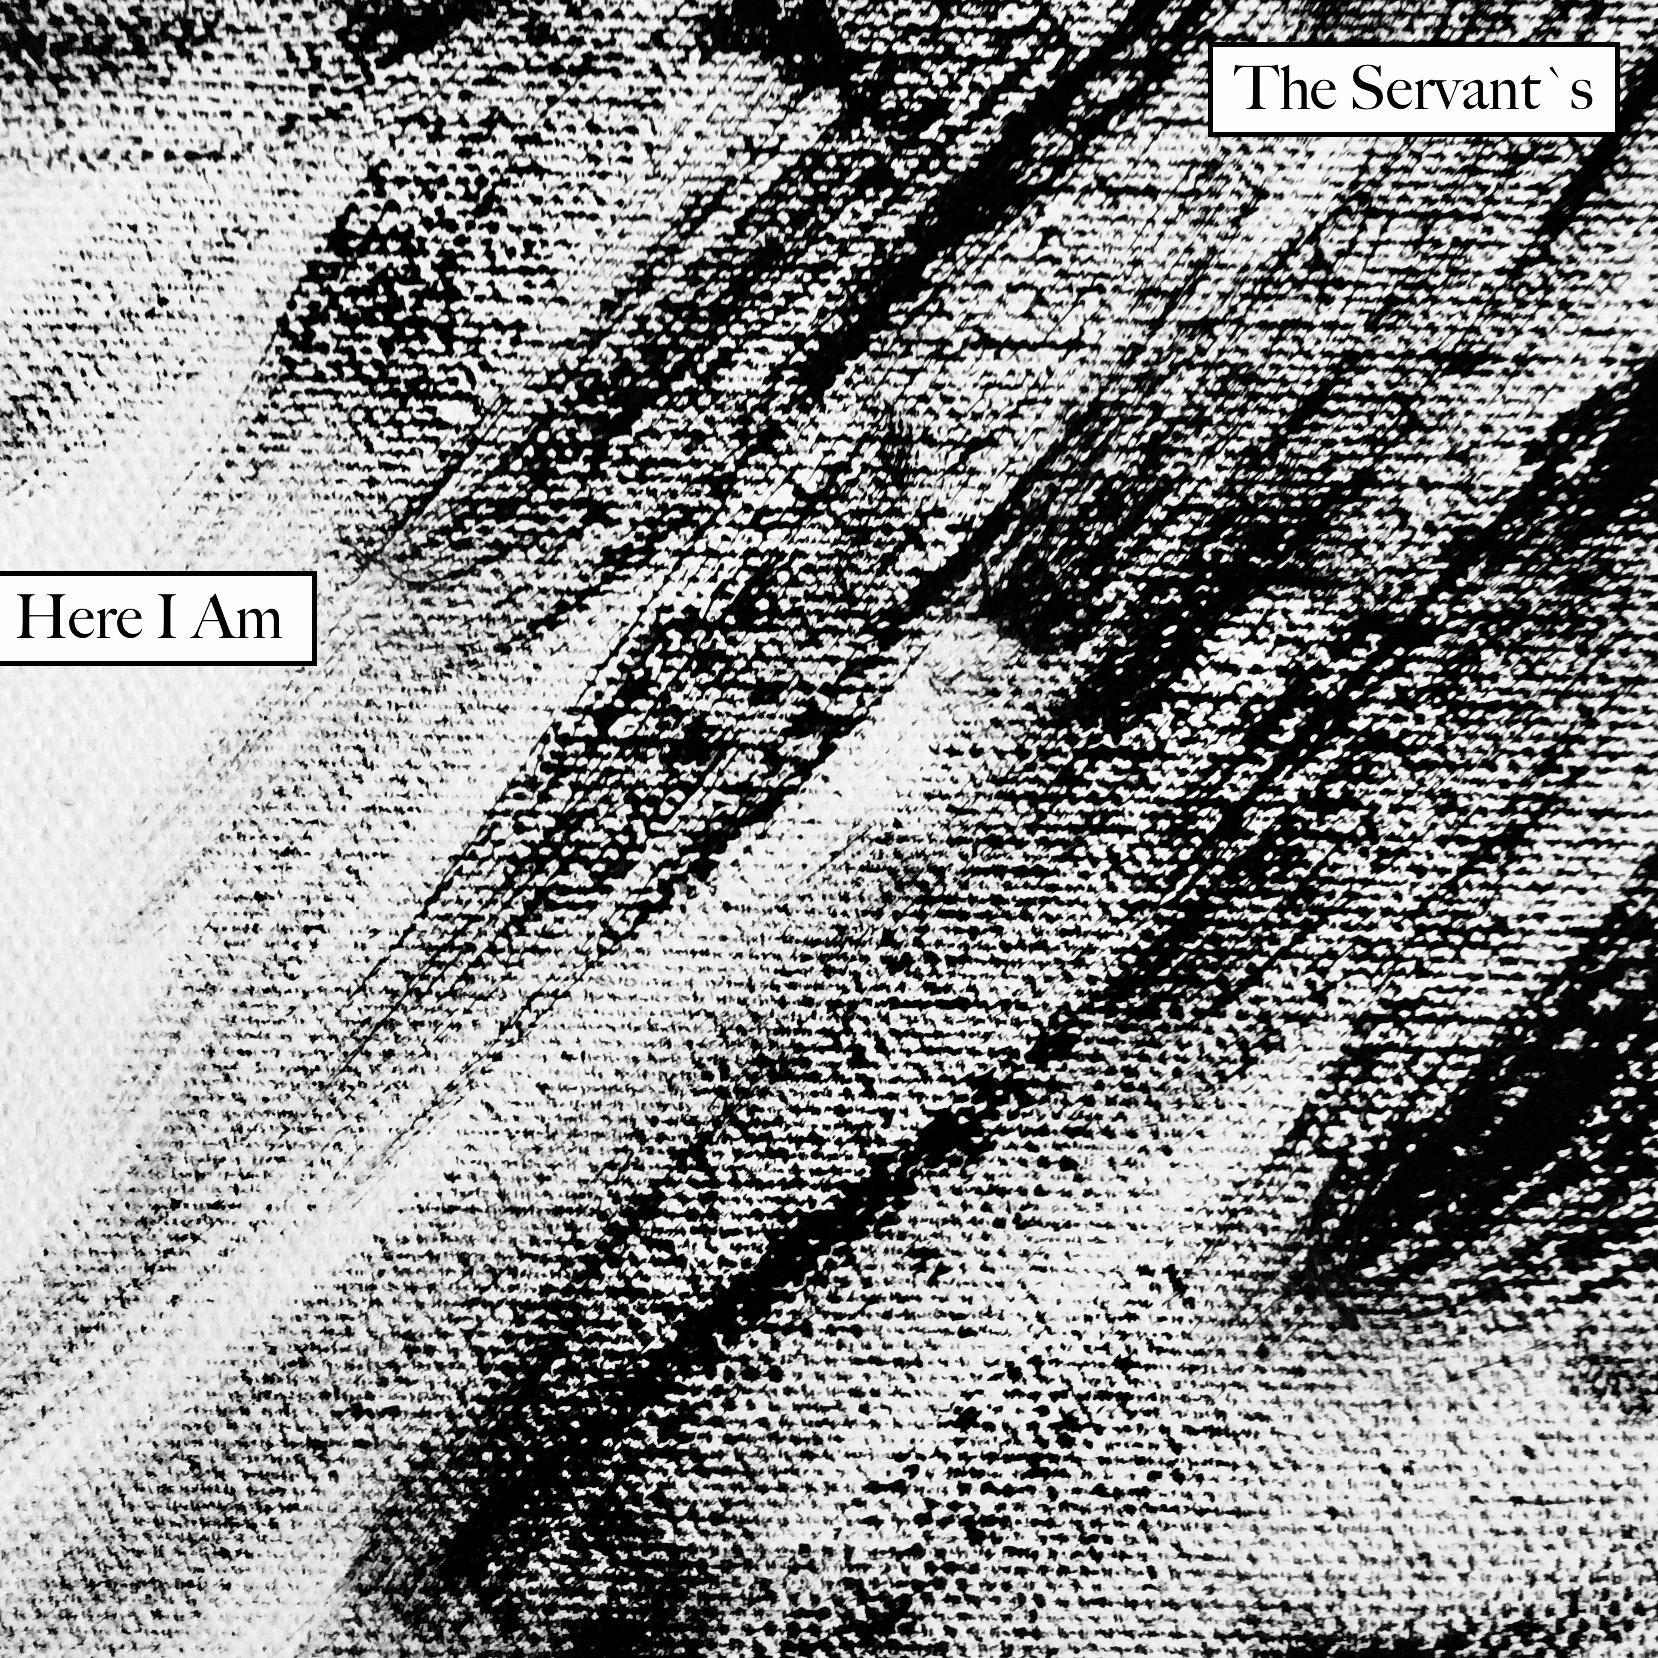 The Servant’s – “Here I Am”